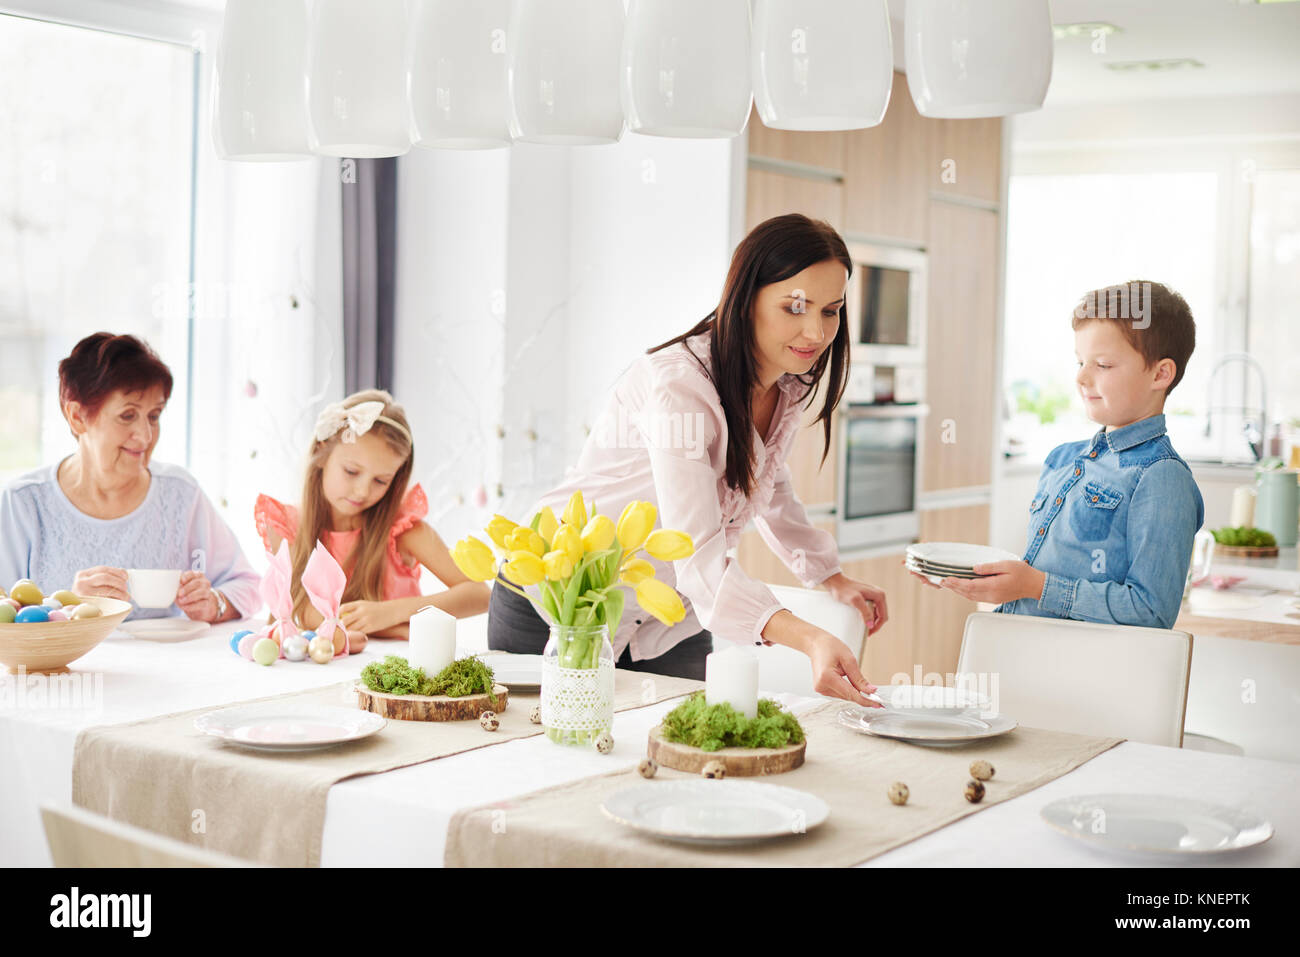 Woman and family preparing place settings at easter dining table Stock Photo